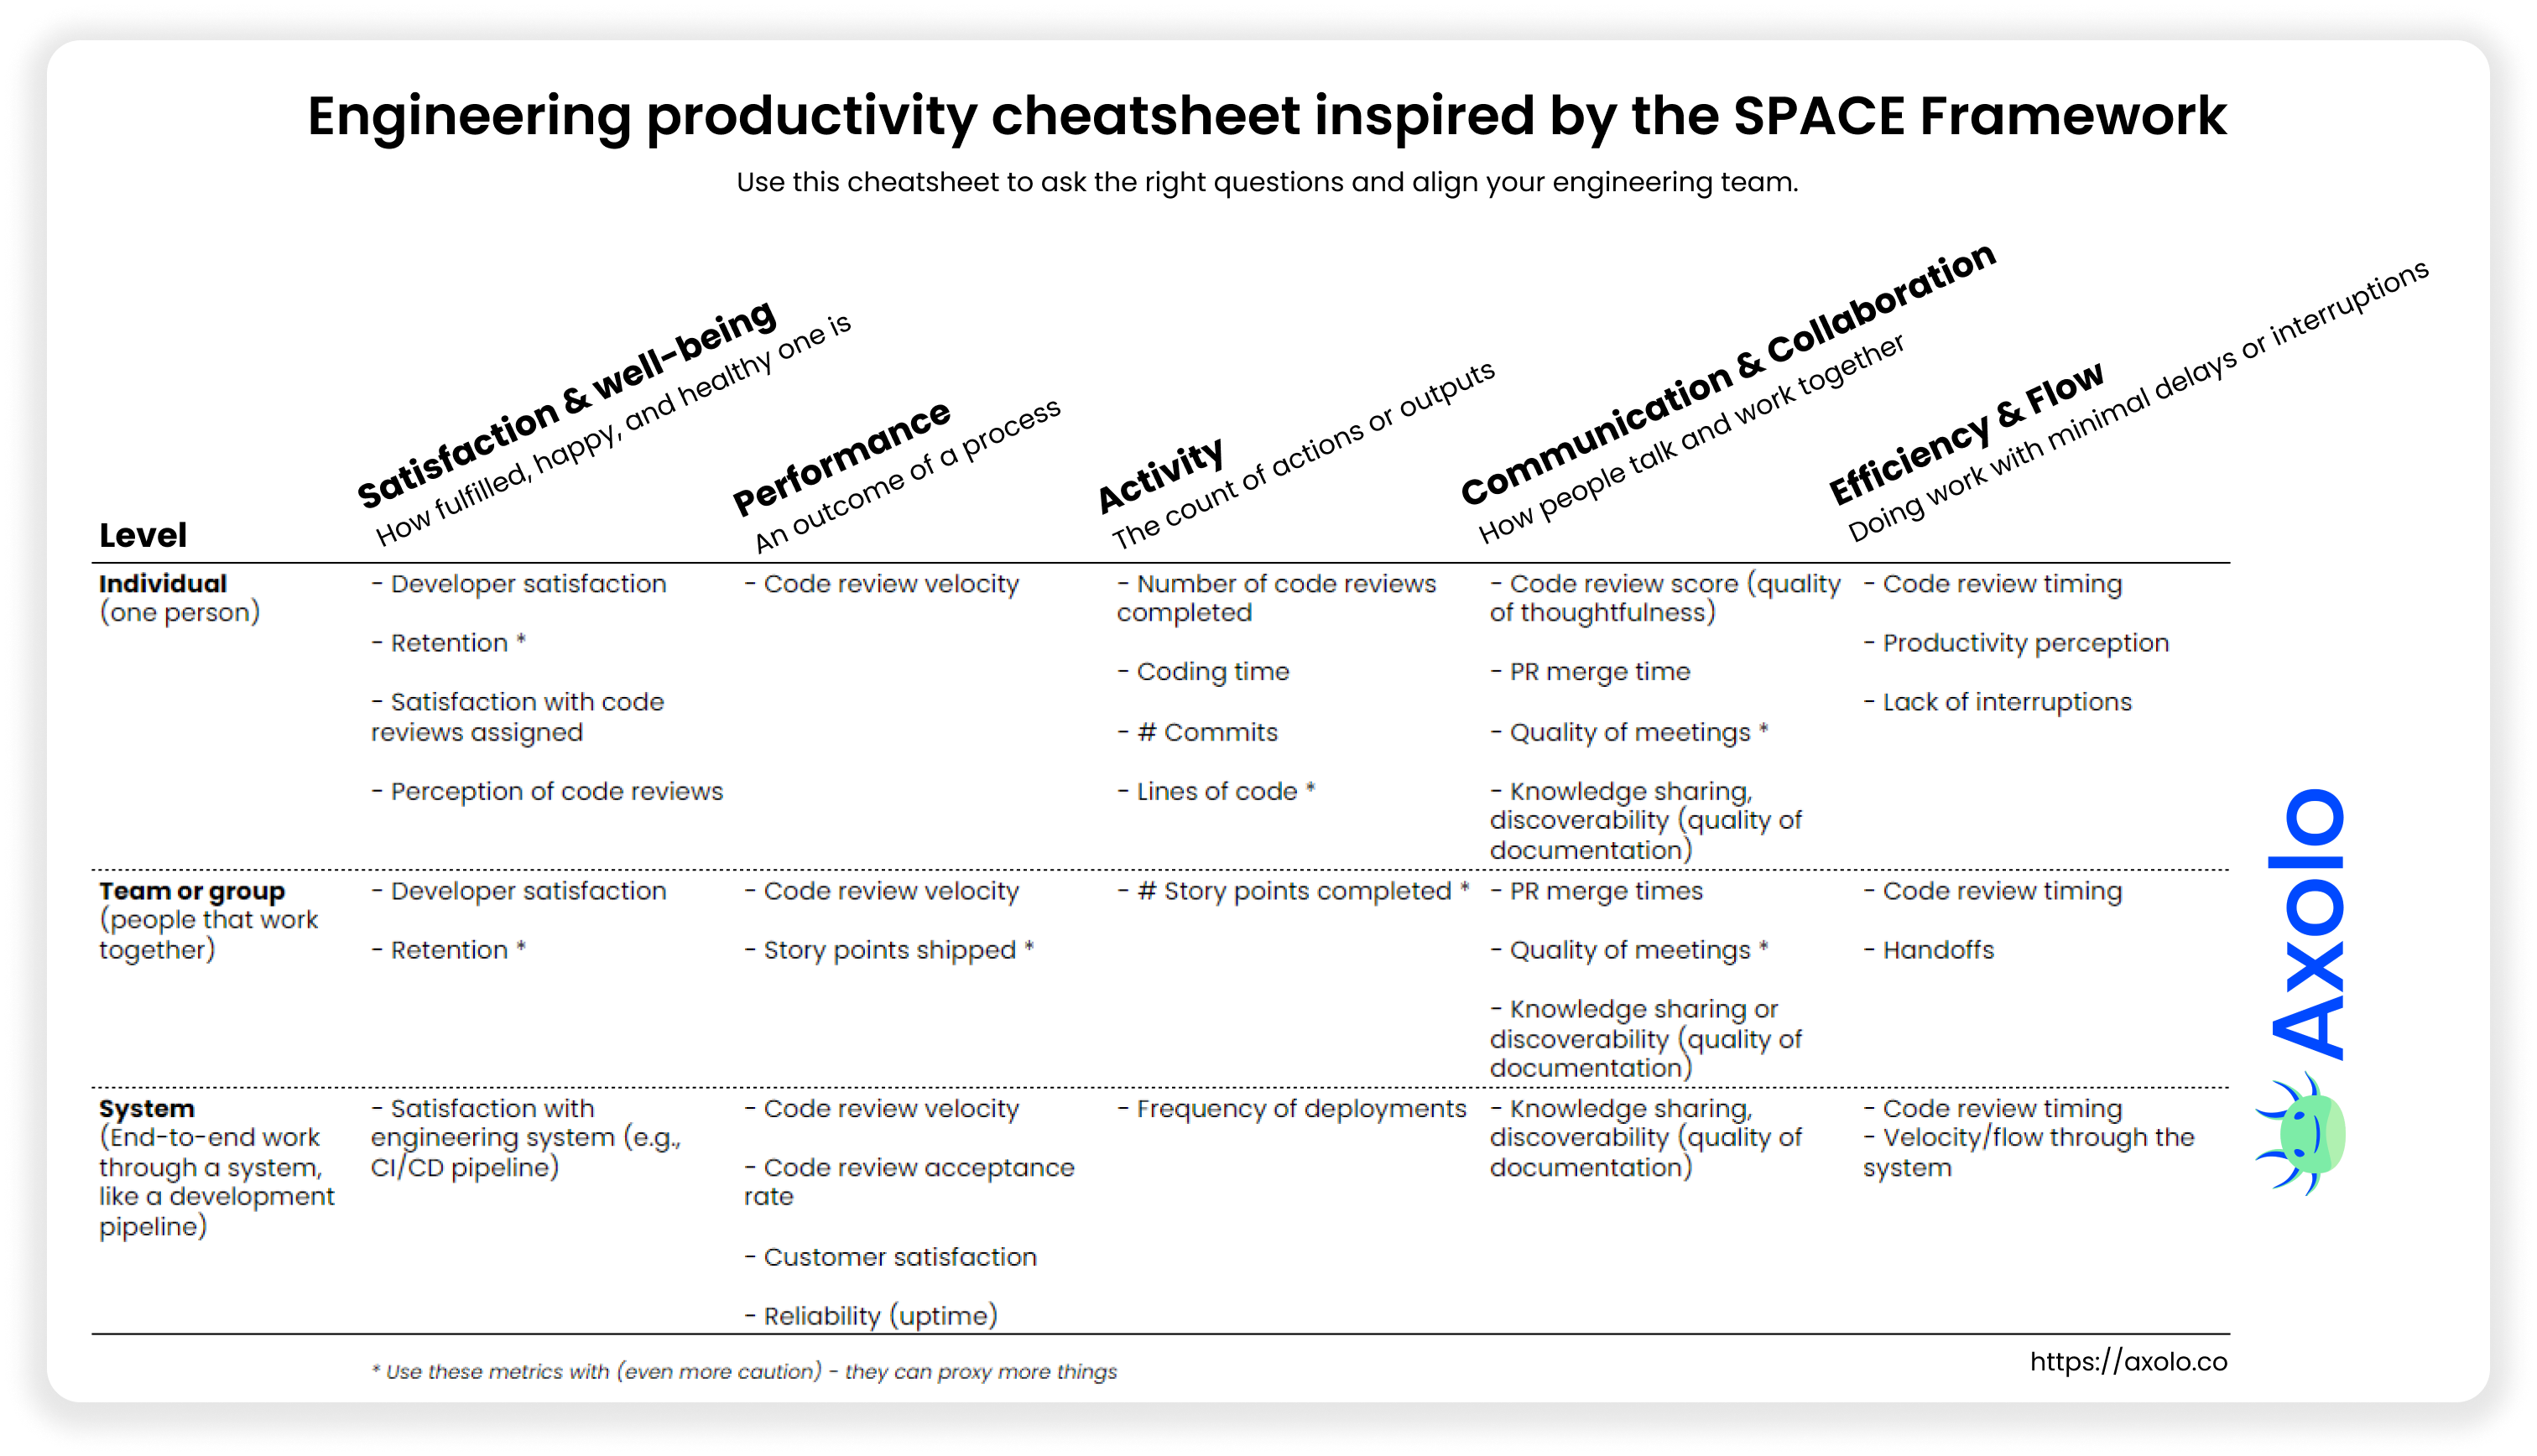 Engineering productivity cheastsheet inspired by the SPACE Framework - Axolo